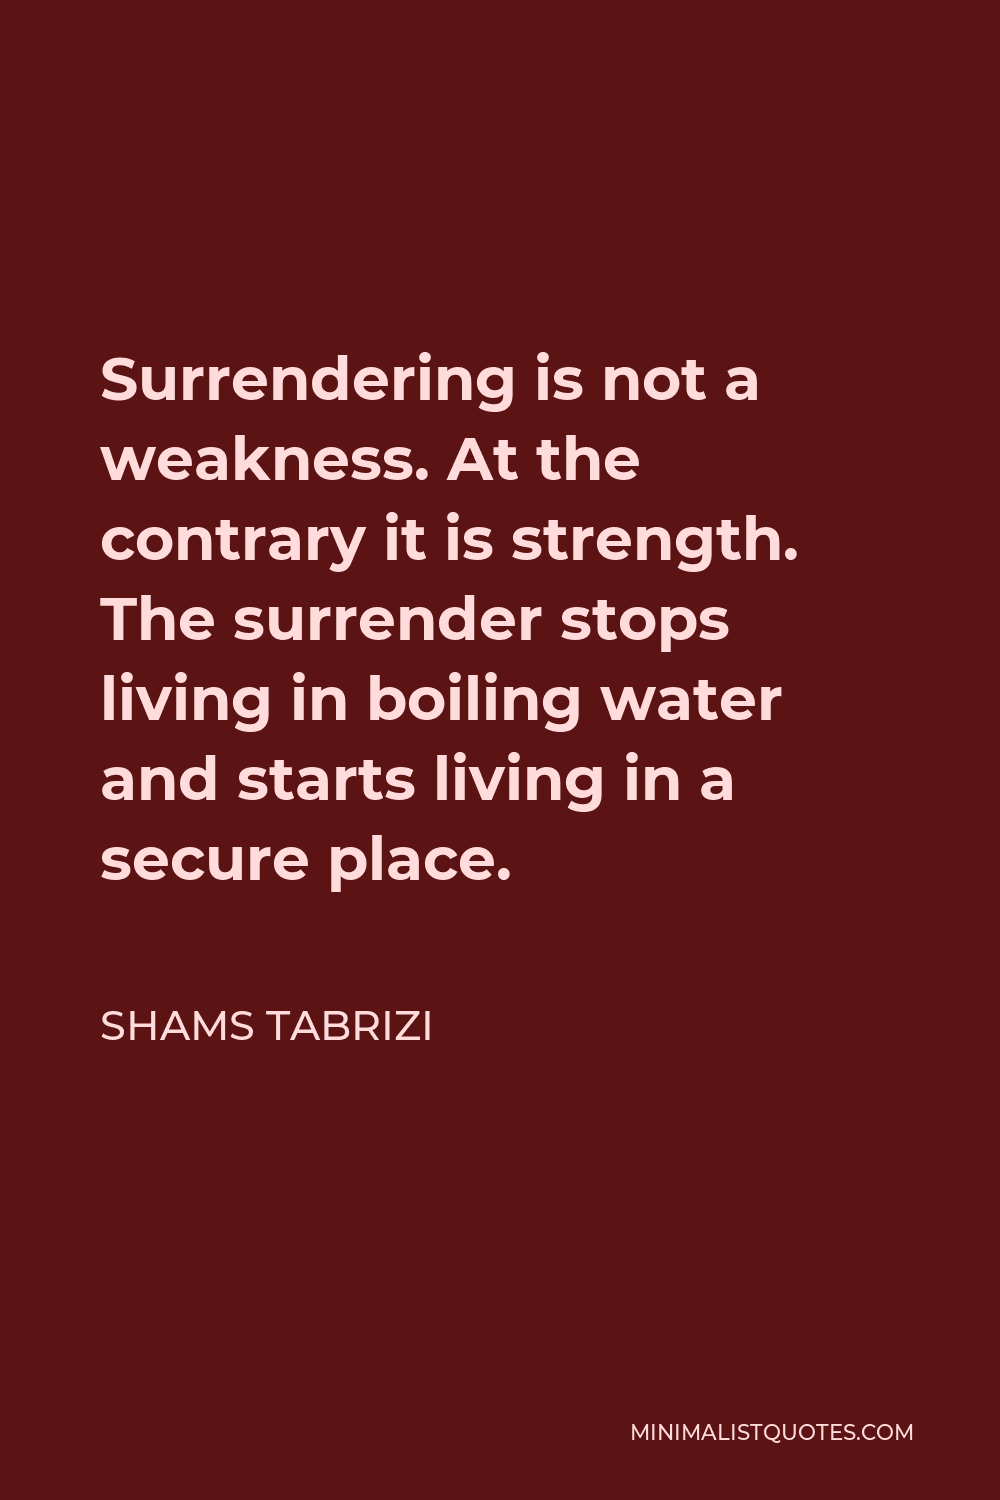 Shams Tabrizi Quote - Surrendering is not a weakness. At the contrary it is strength. The surrender stops living in boiling water and starts living in a secure place.